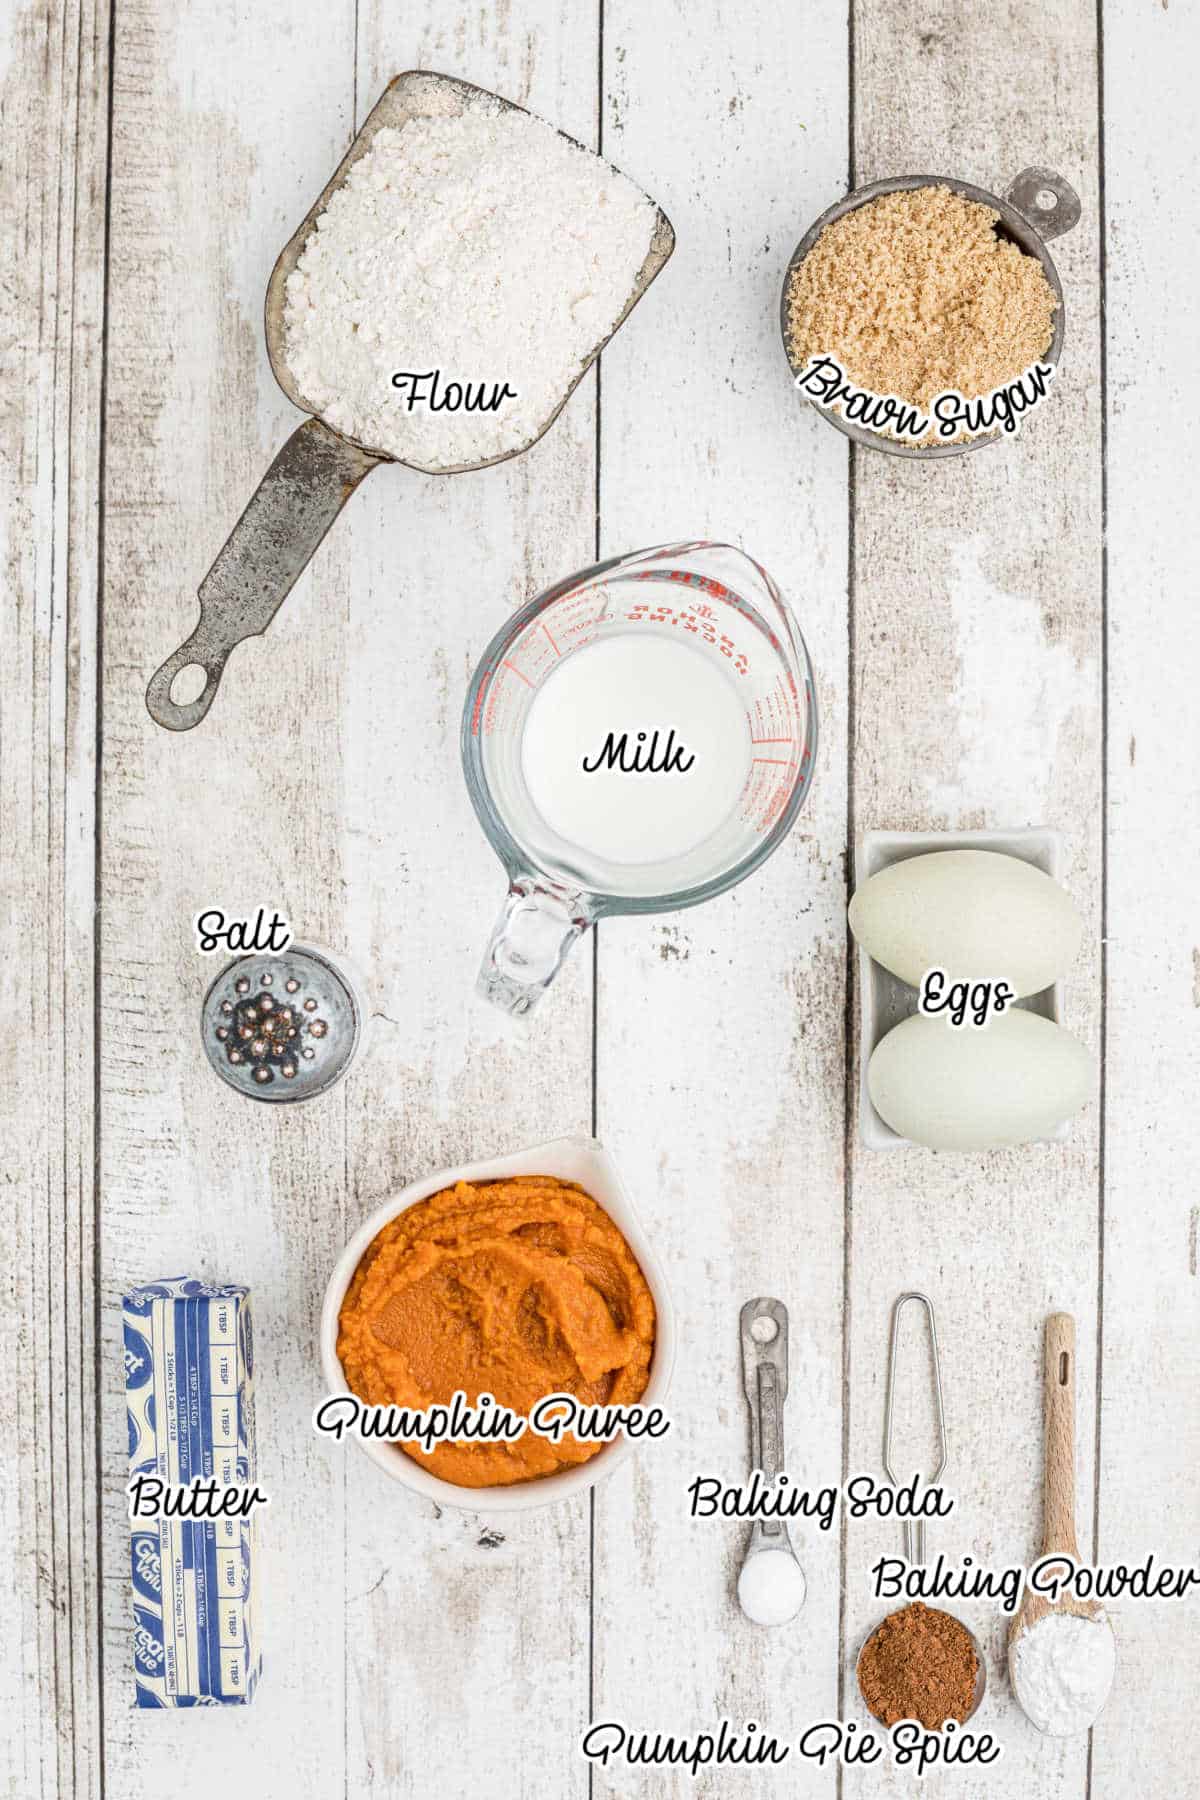 Ingredients laid out showing what is needed to make pumpkin spice donuts.